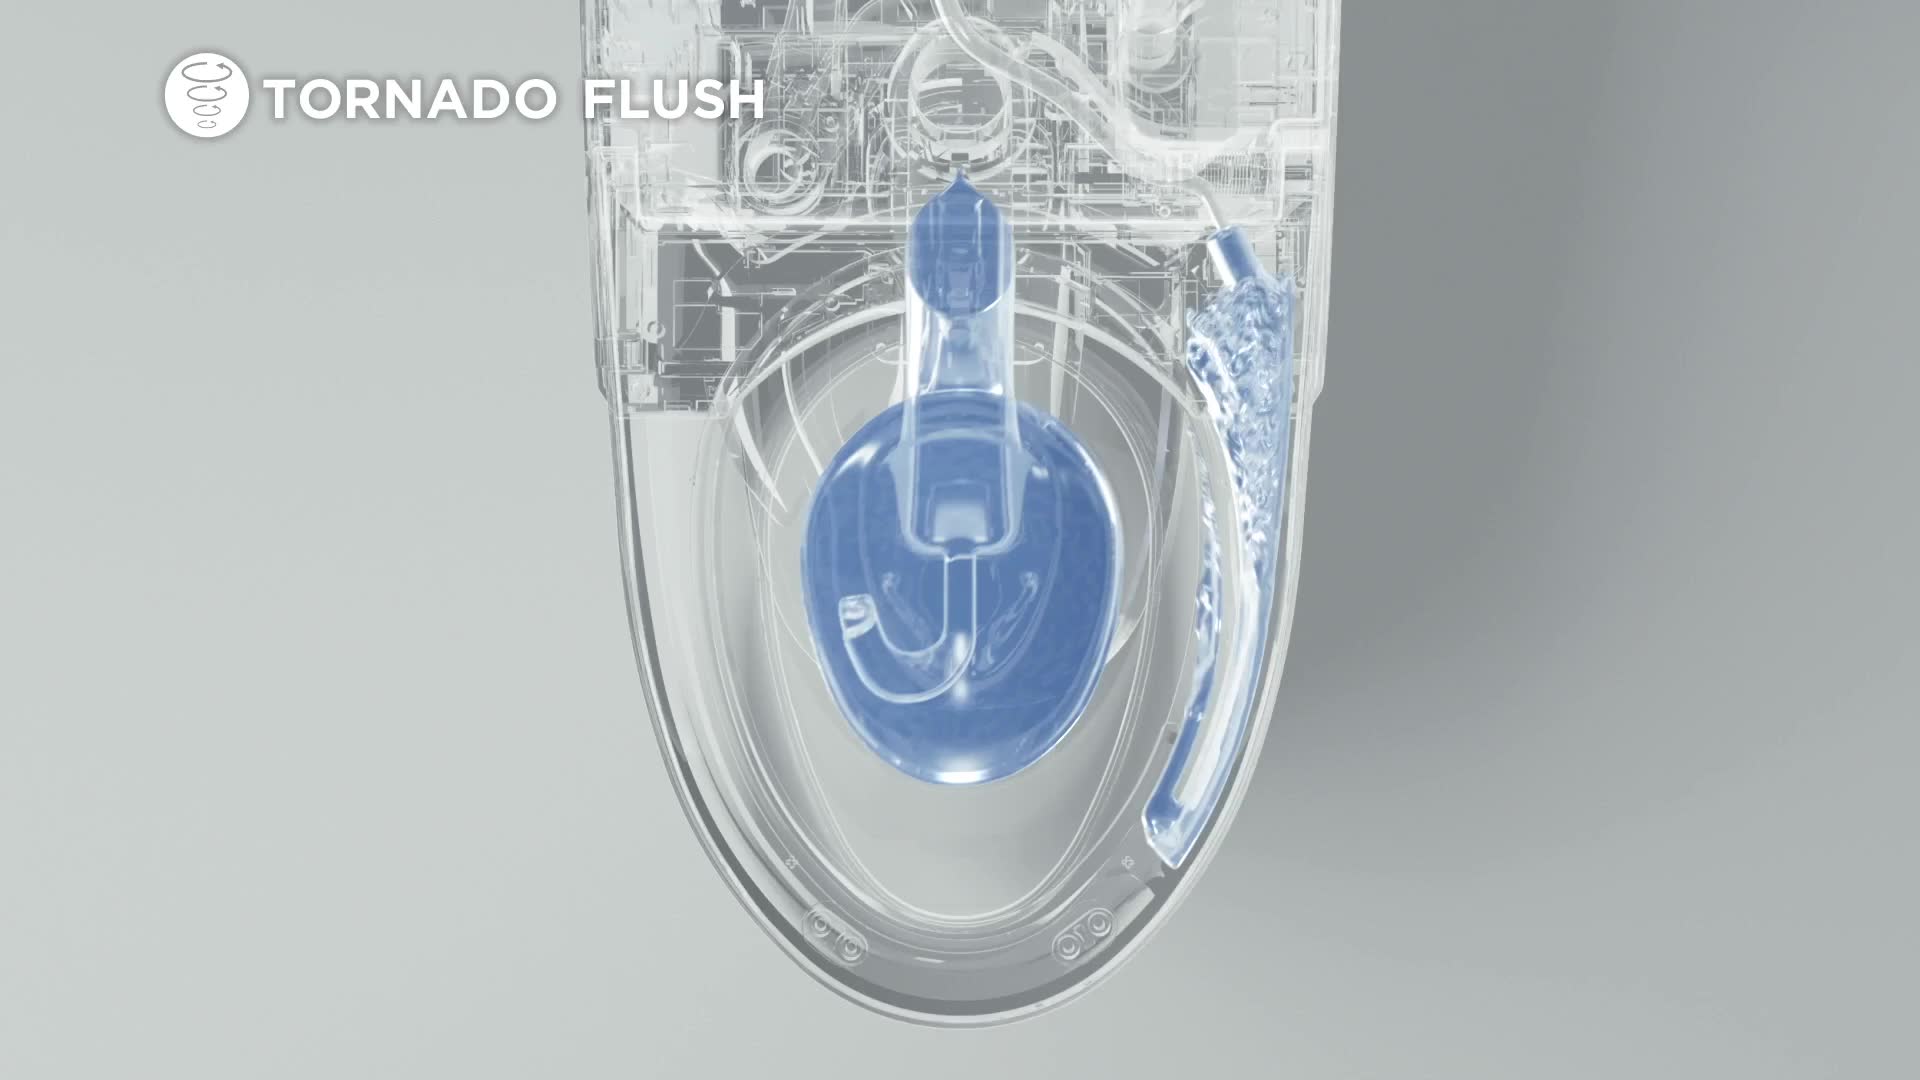 X-ray view of TORNADO FLUSH in action from above